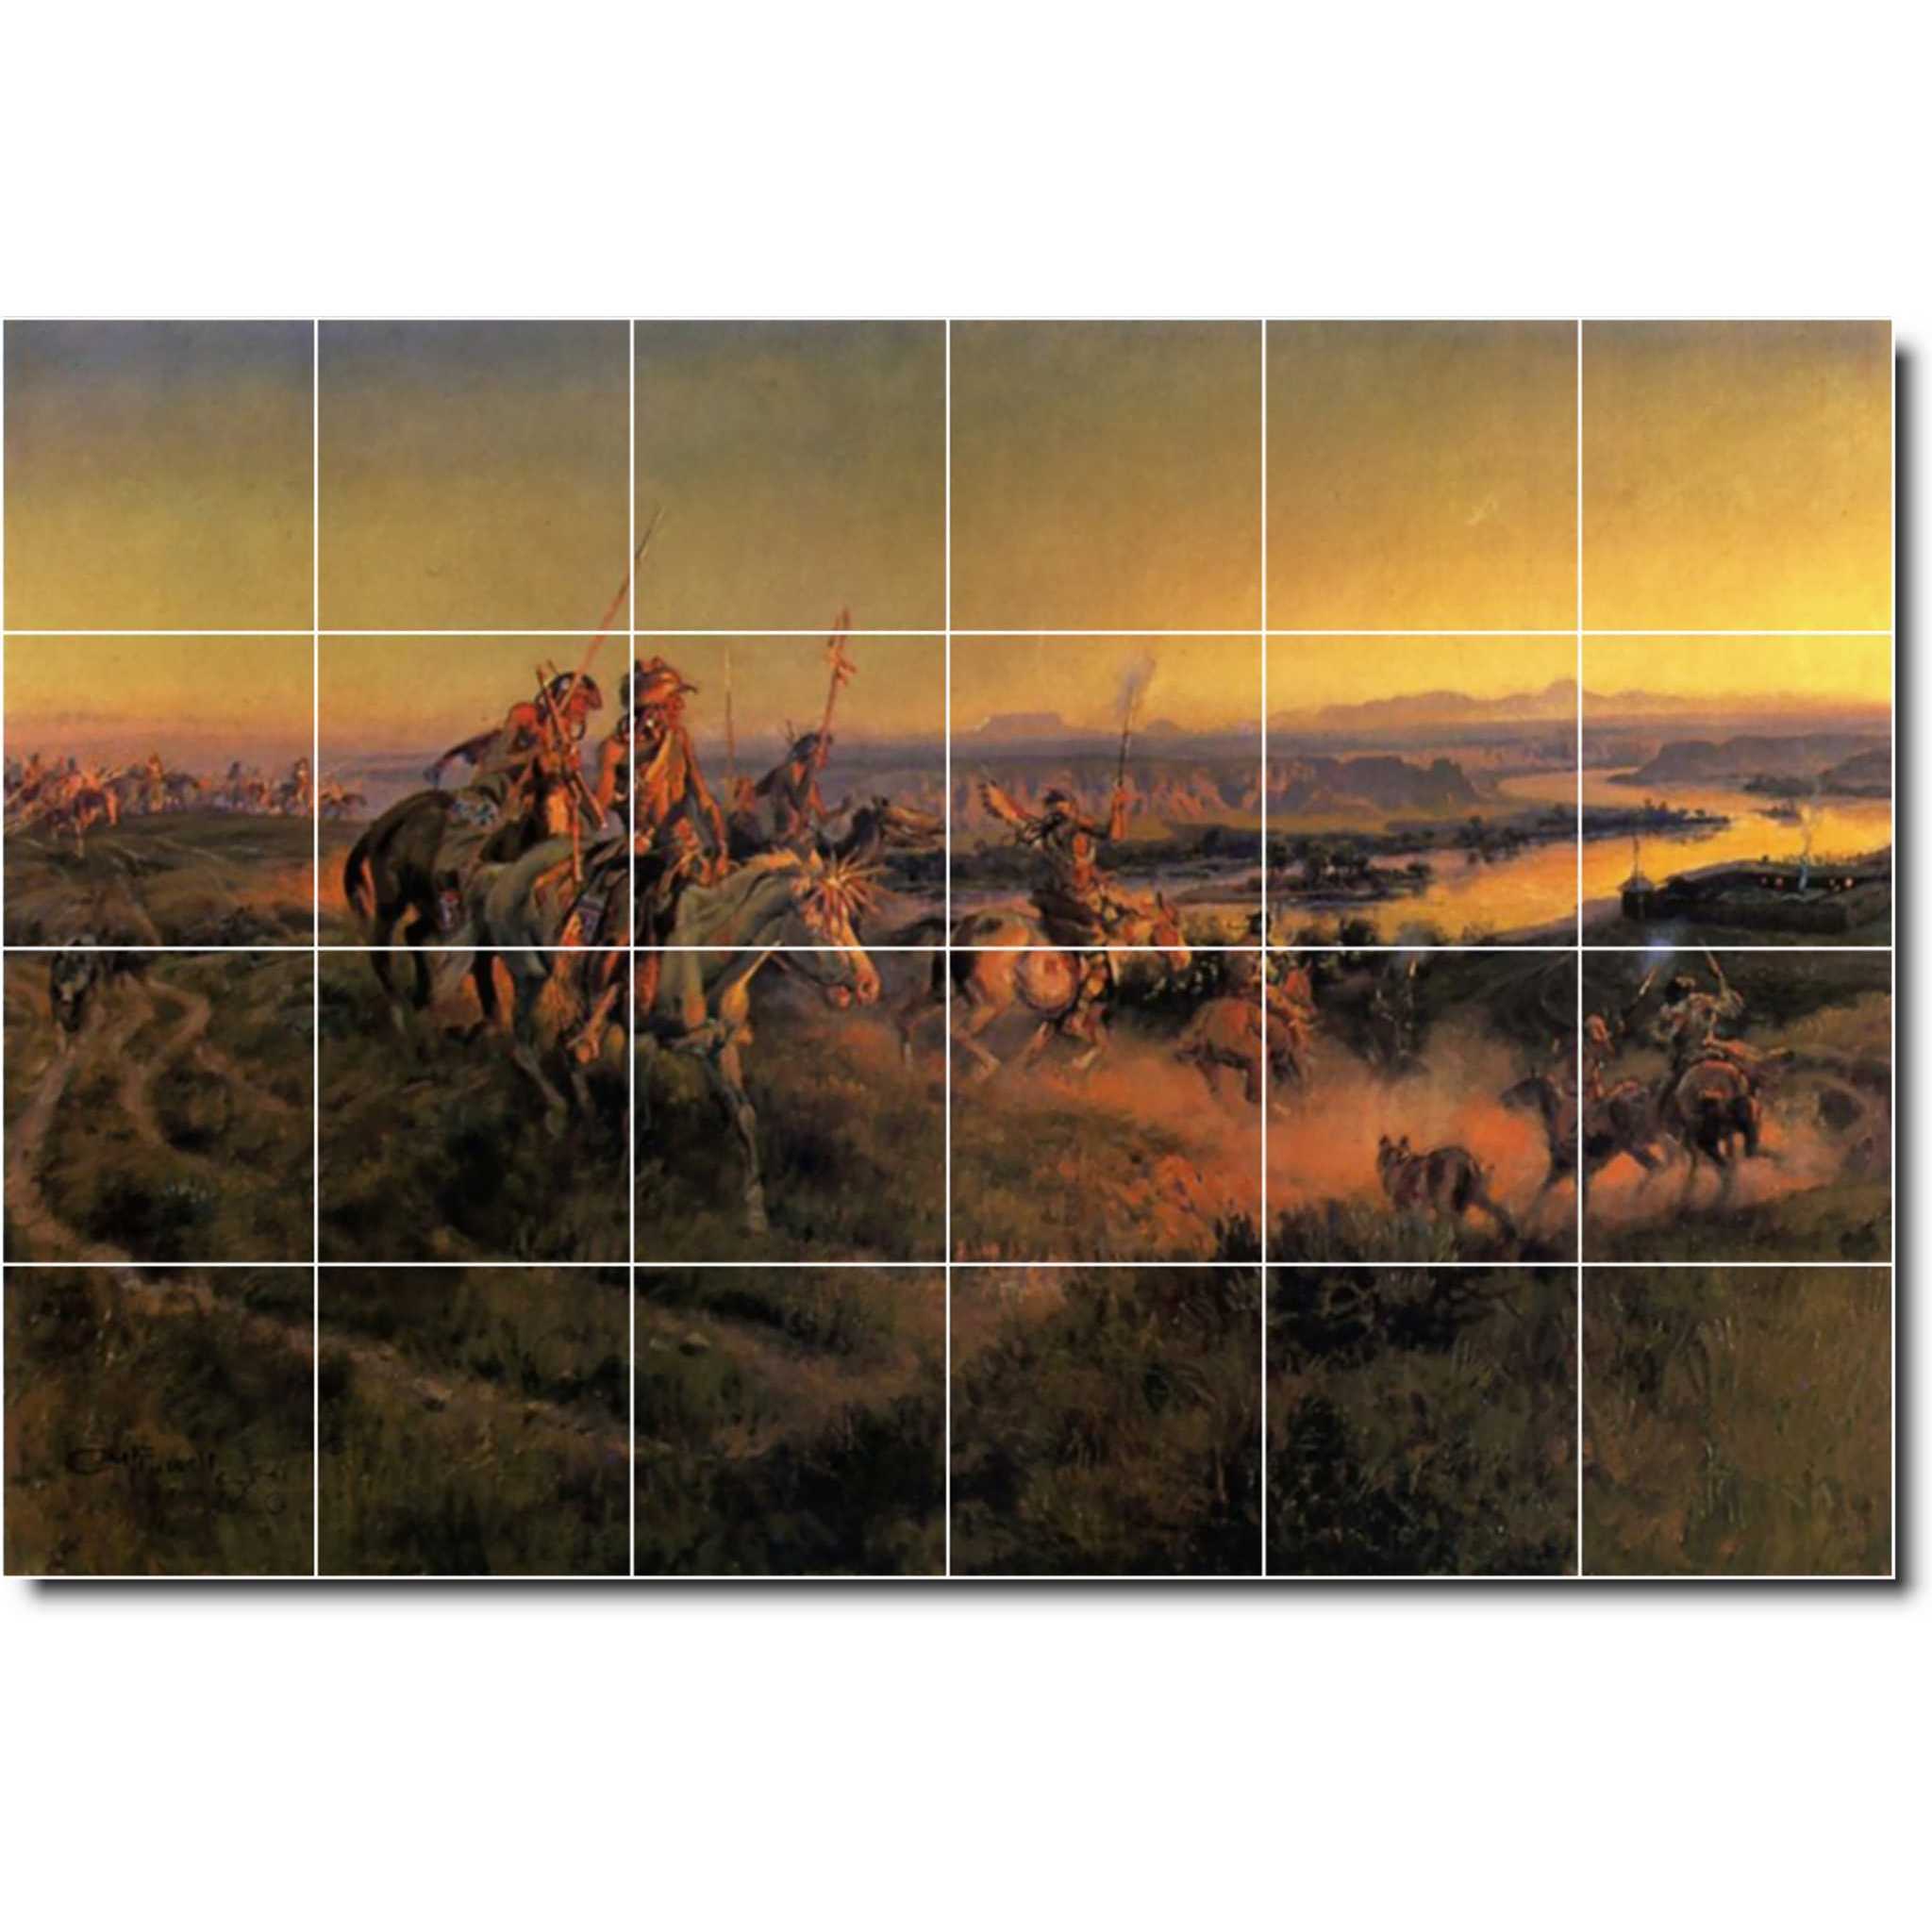 charles russell landscape painting ceramic tile mural p07795